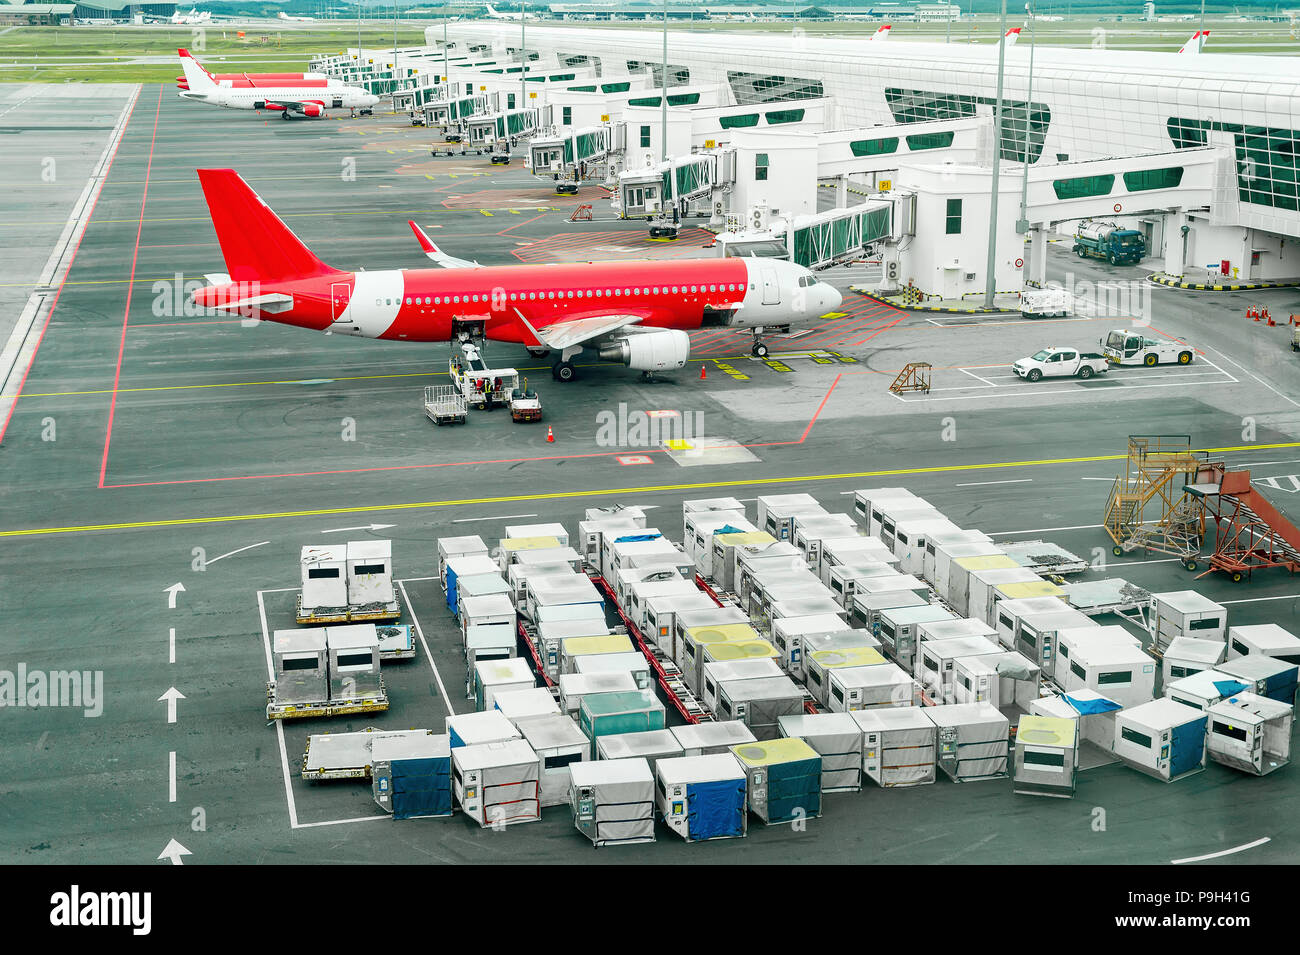 Airplains and freight containers in airport of Kuala Lumpur, Malaysia Stock Photo